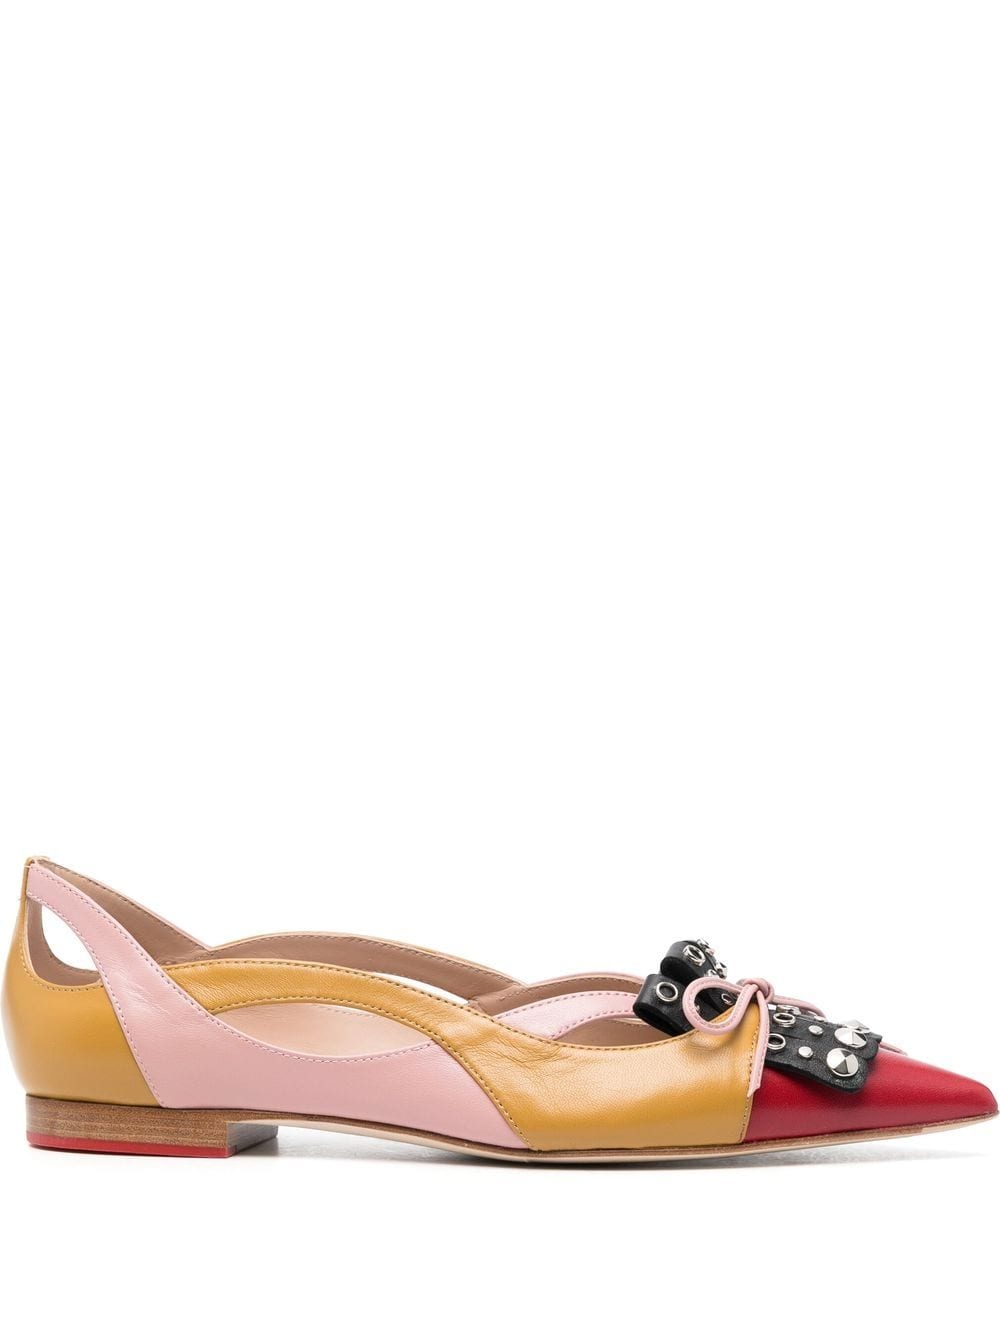 Scarosso Candy leather pumps - Pink von Scarosso